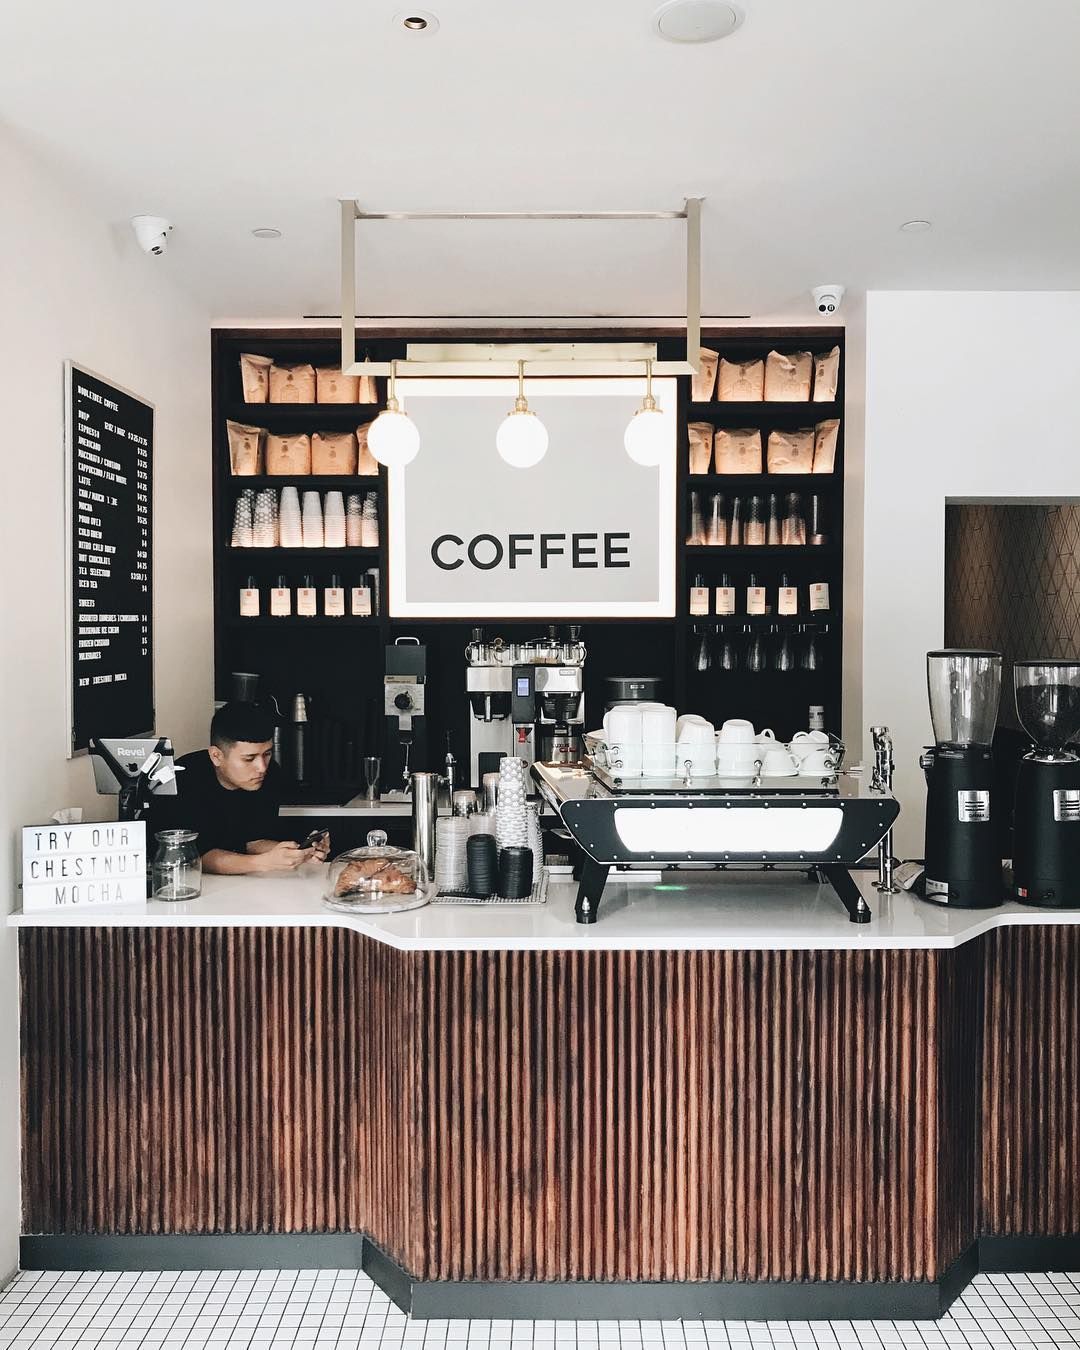 New York Citys Best Coffee Shops Your guide to finding the best cup of ...